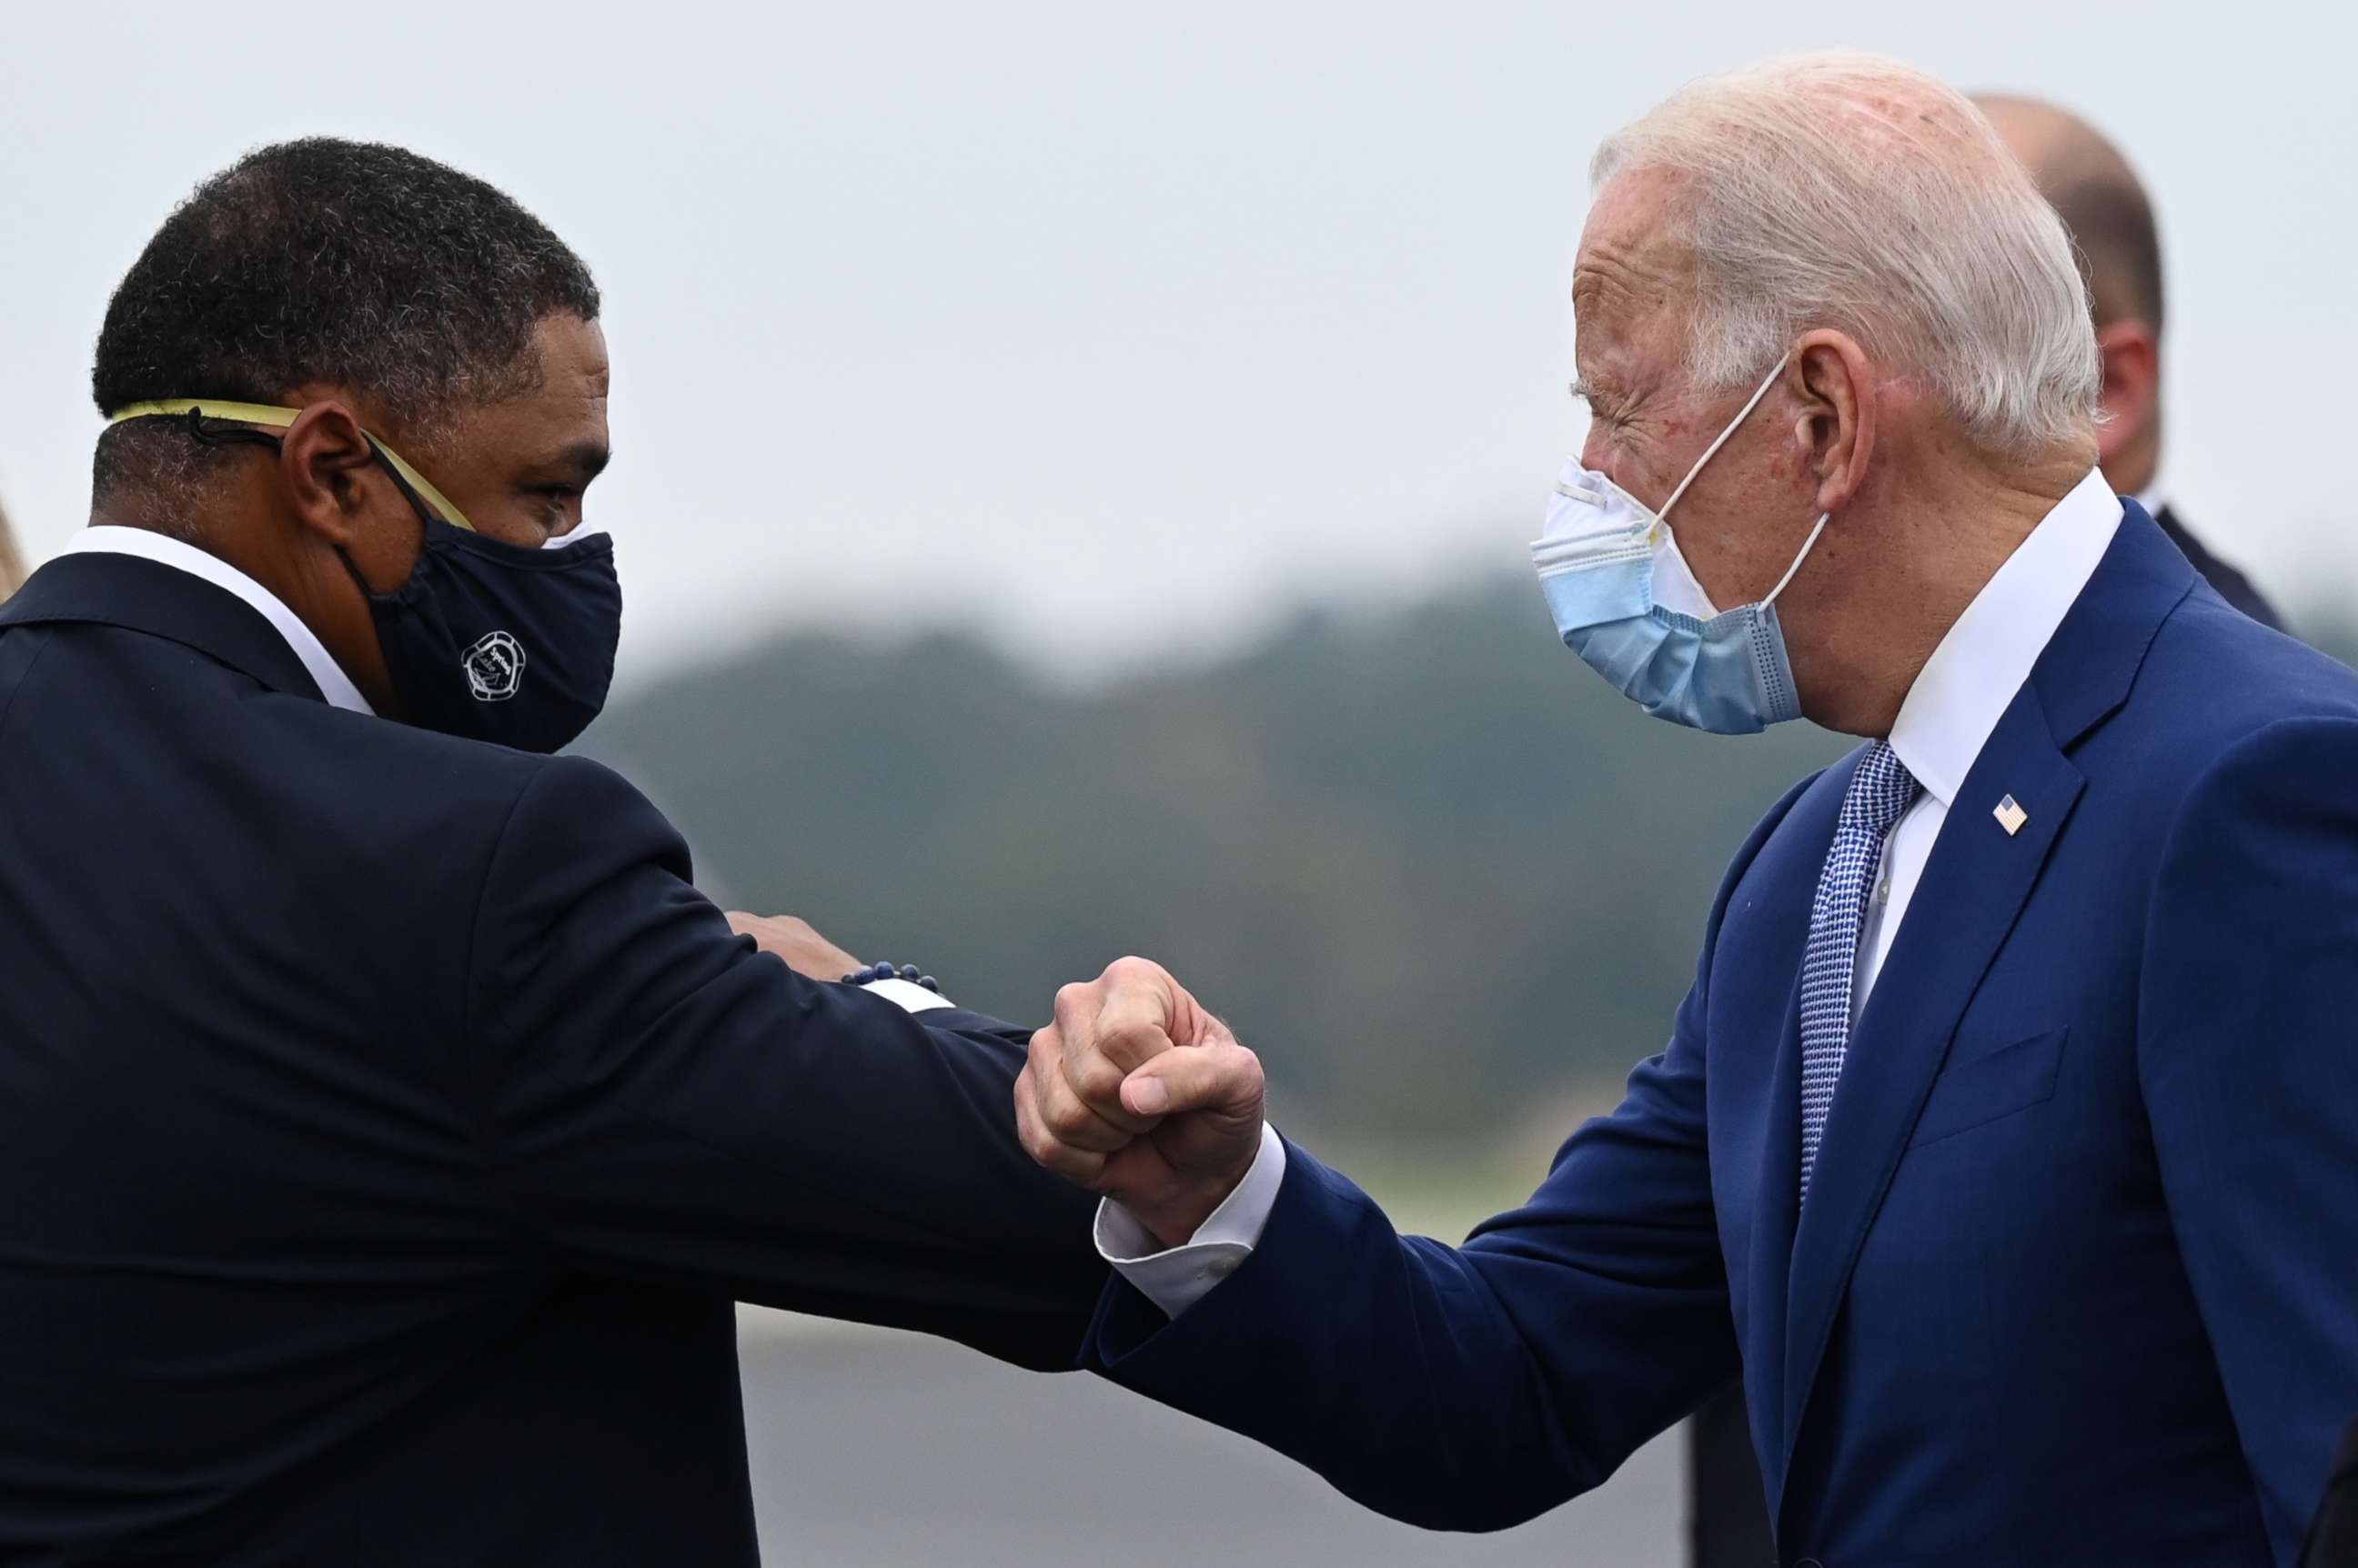 PHOTO: Democratic presidential candidate Joe Biden is greeted by Congressman Cedric Richmond as he arrives in Columbus, Ga., on Oct. 27, 2020.